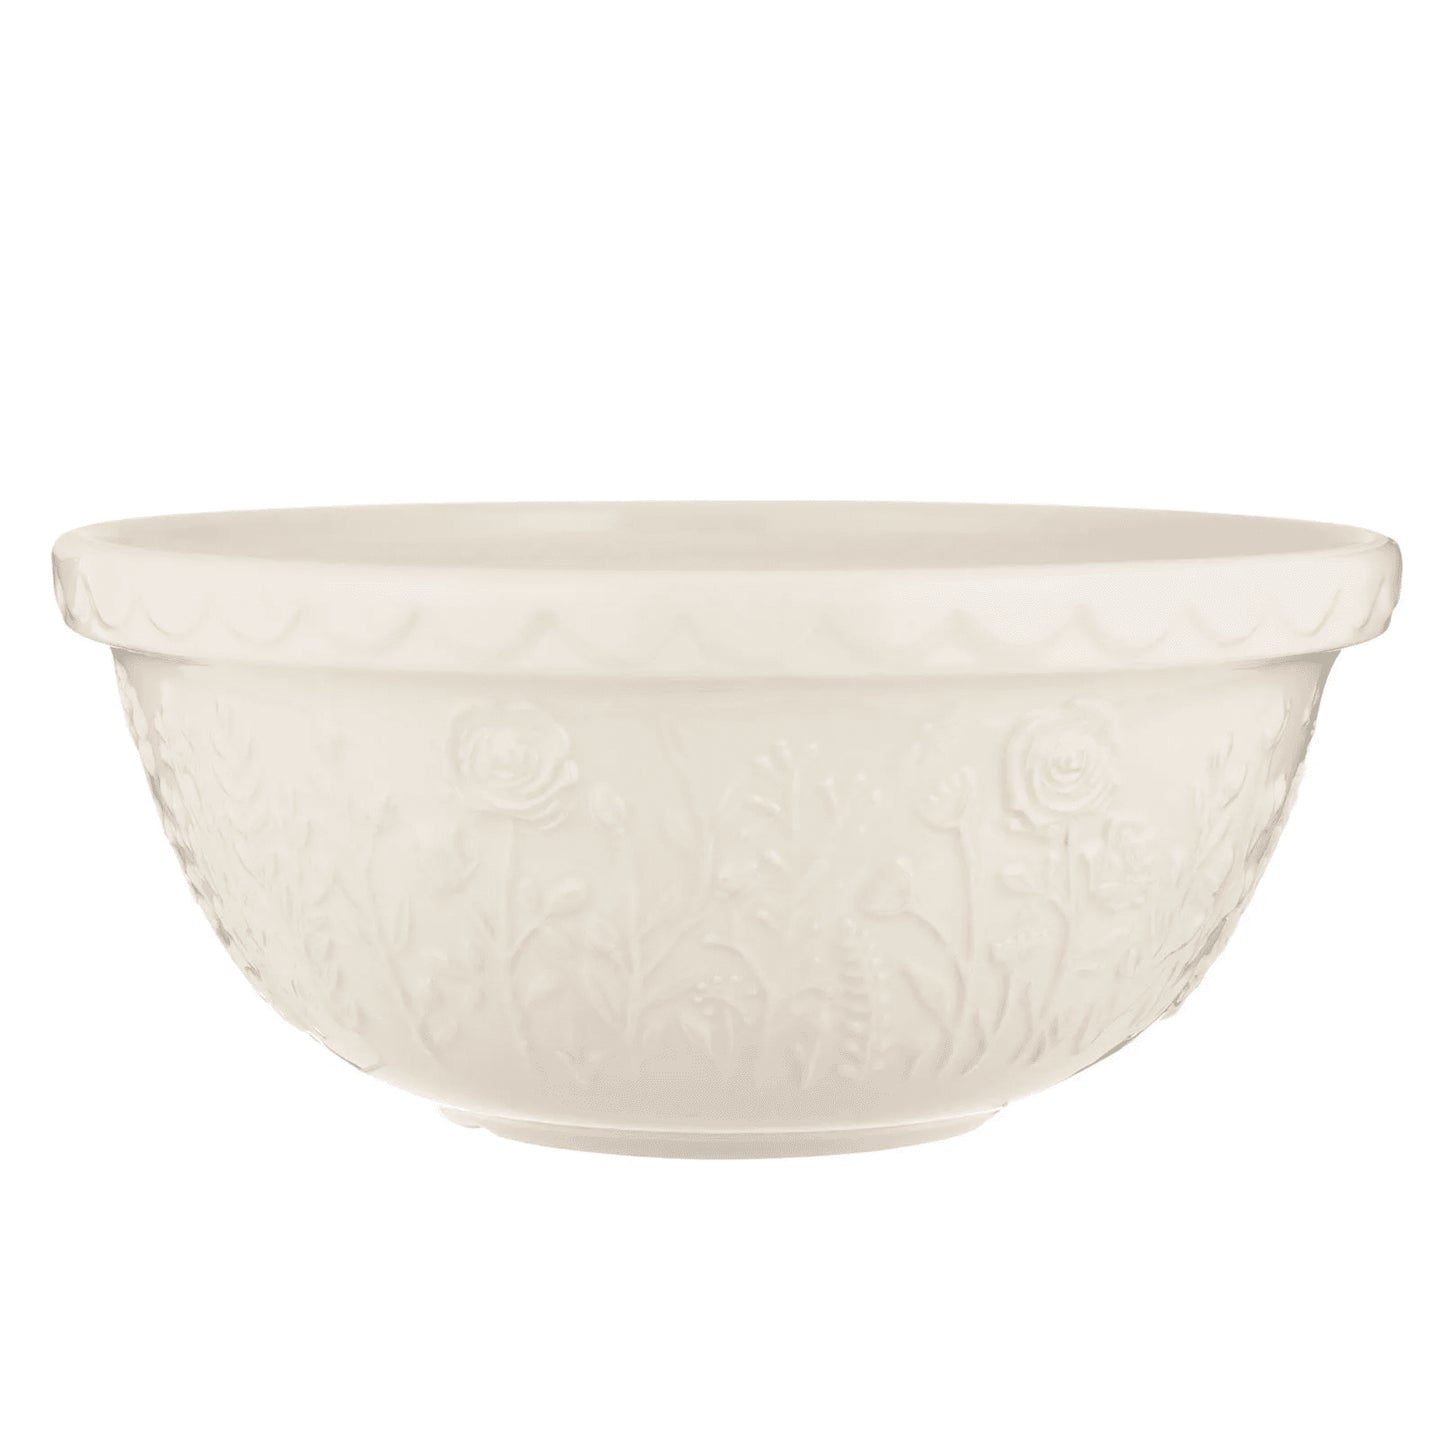 Meadow Rose Mixing Bowl 29cm